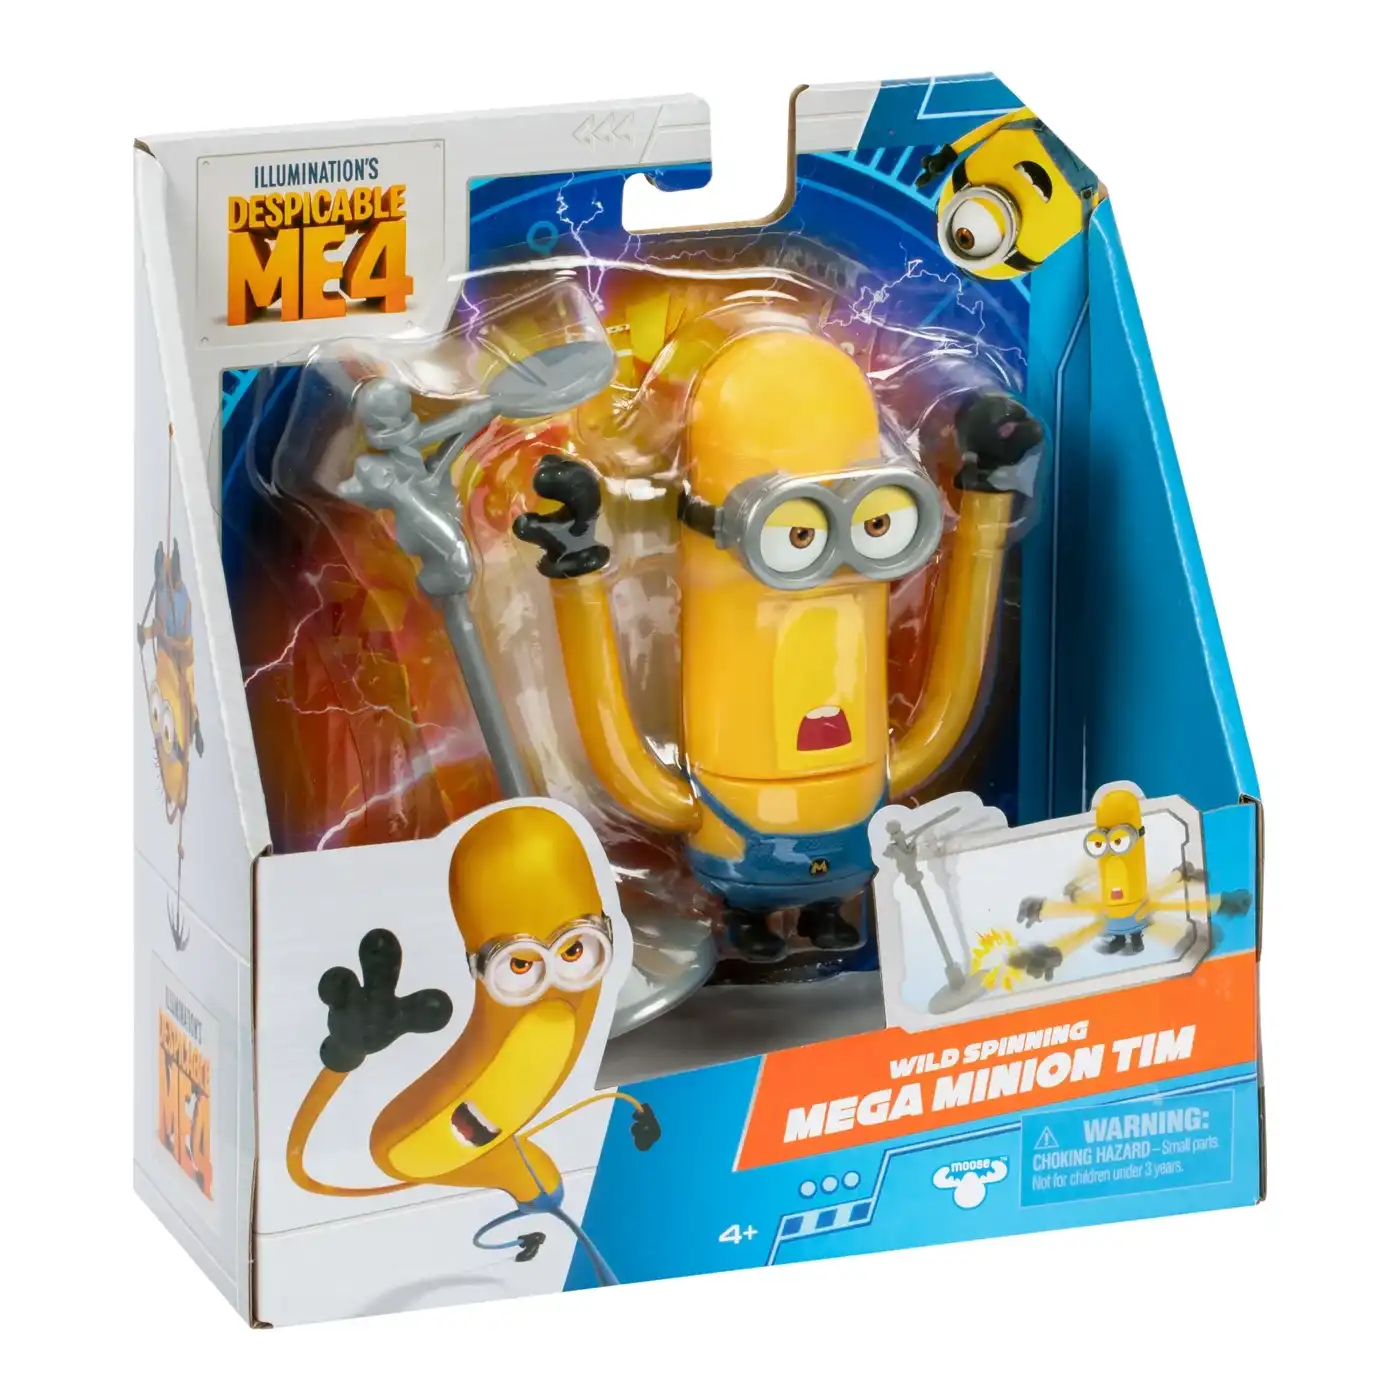 Despicable Me 4 Mega Minions 4in Action Figure. Assorted